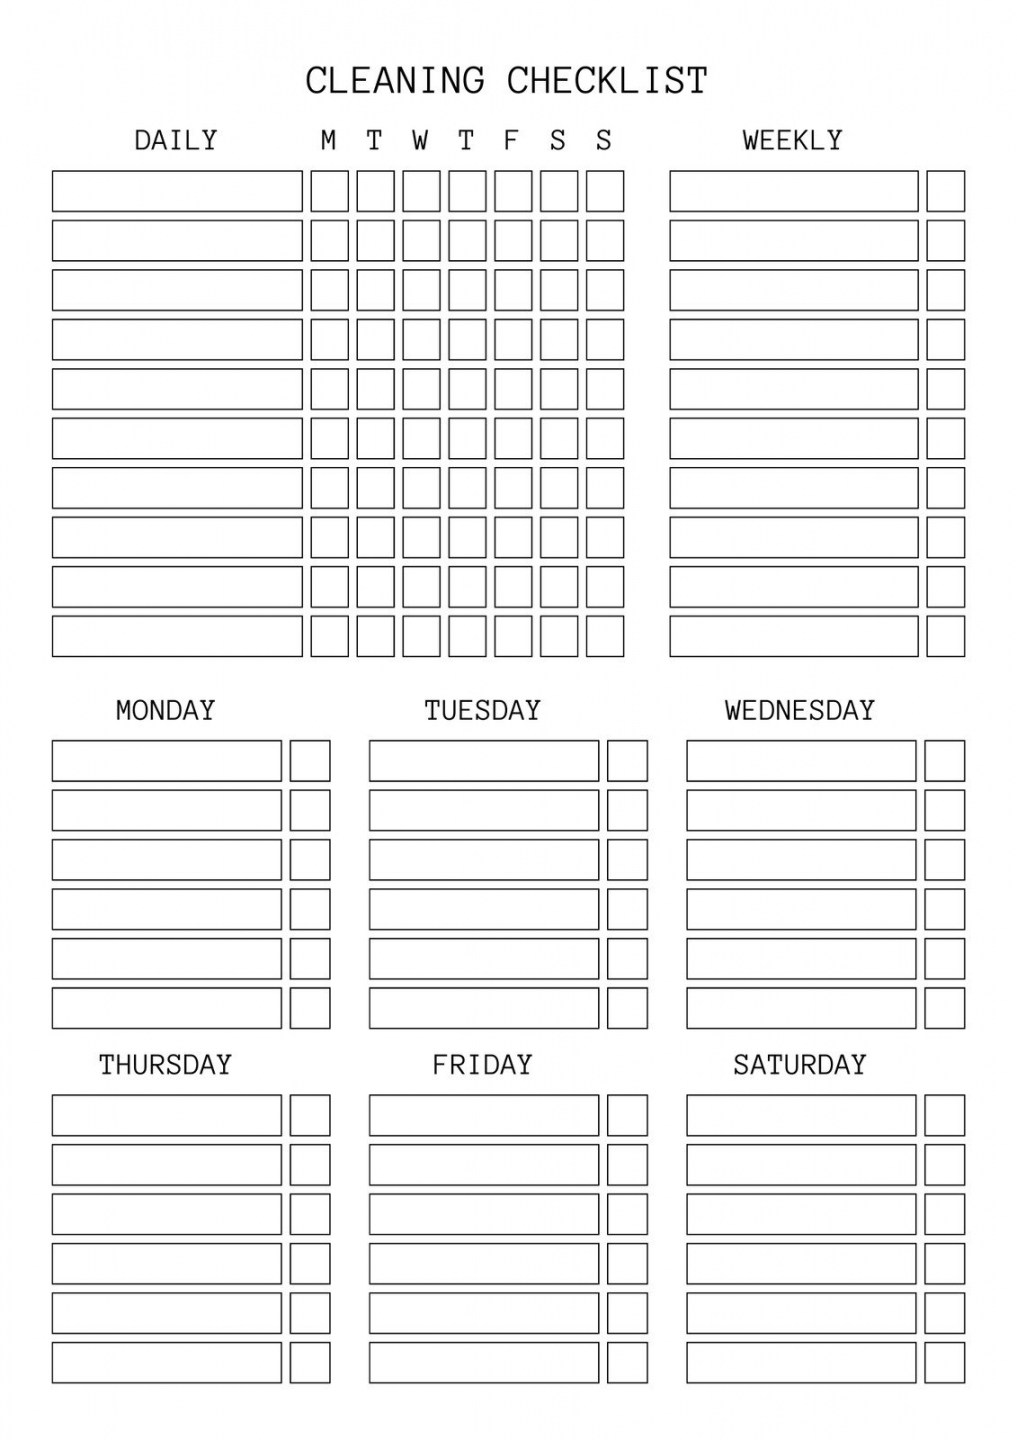 Free printable cleaning checklist templates  Canva - FREE Printables - Free Cleaning Schedule Printable